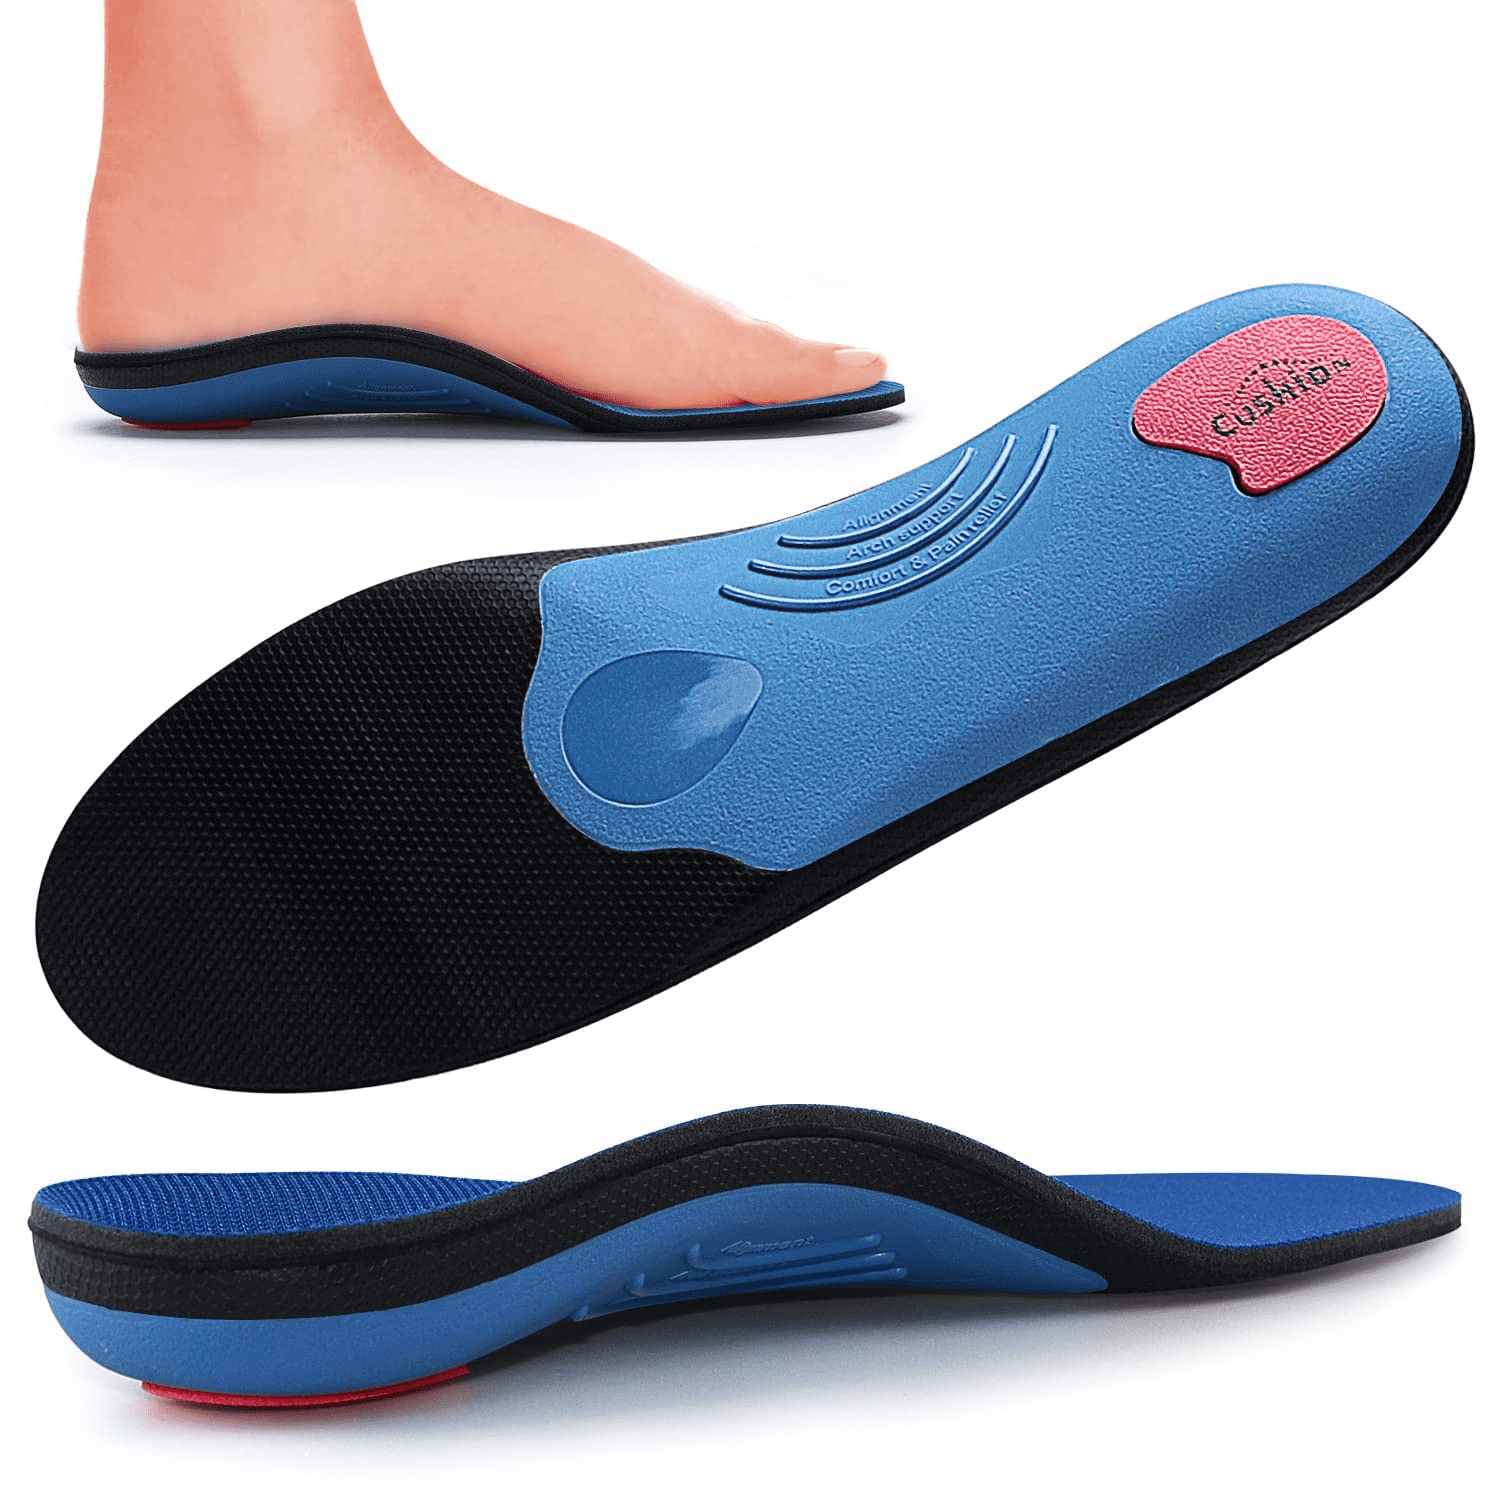 2x Arch Support Foot Heel Pain Relief Plantar Fasciitis Shoes Insole Pads Care 